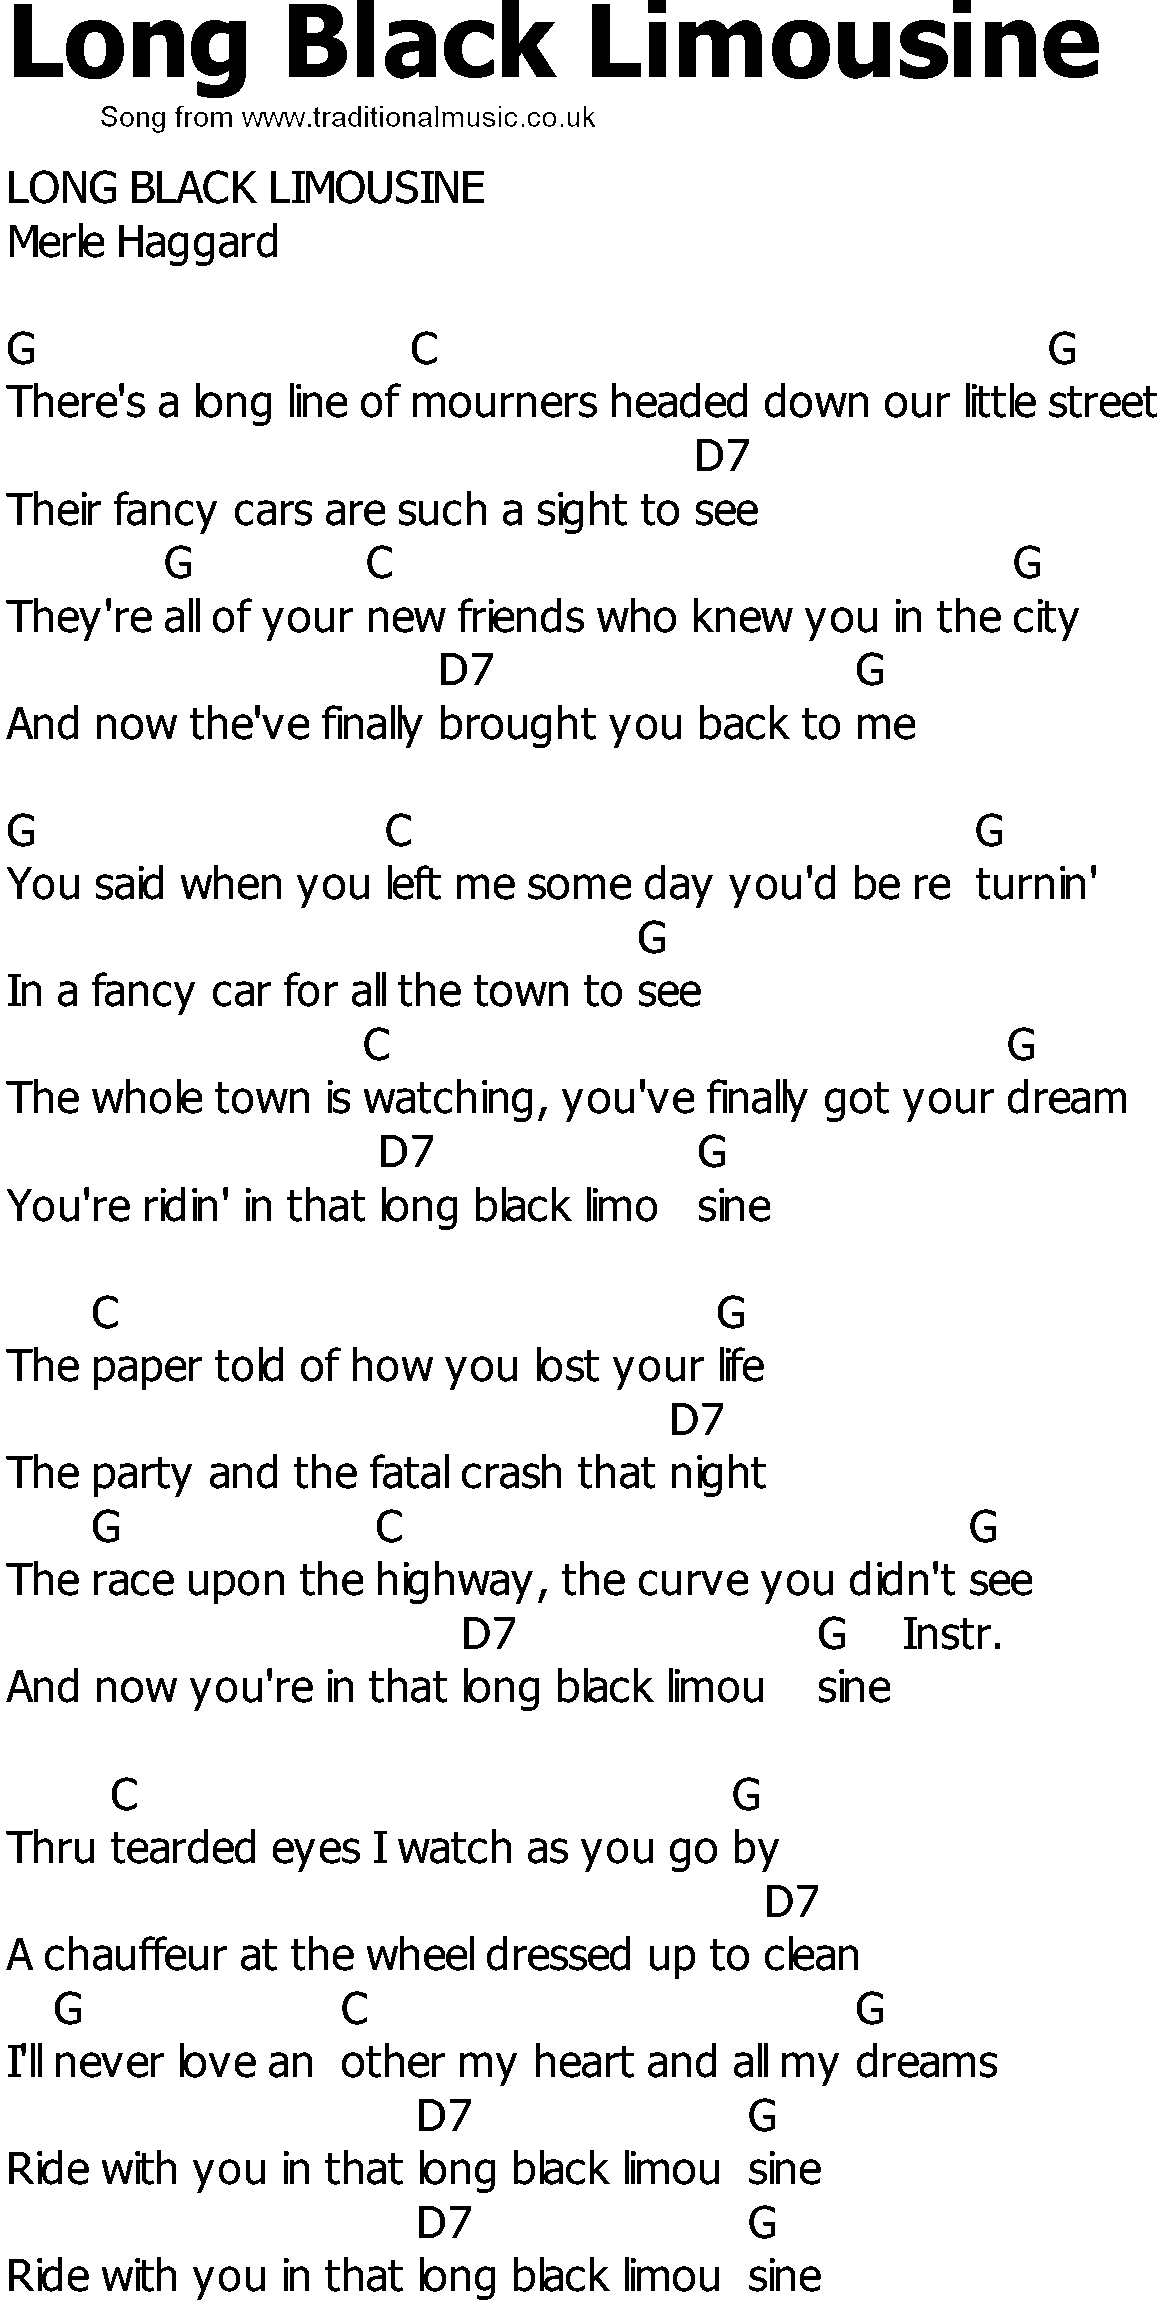 Old Country song lyrics with chords - Long Black Limousine